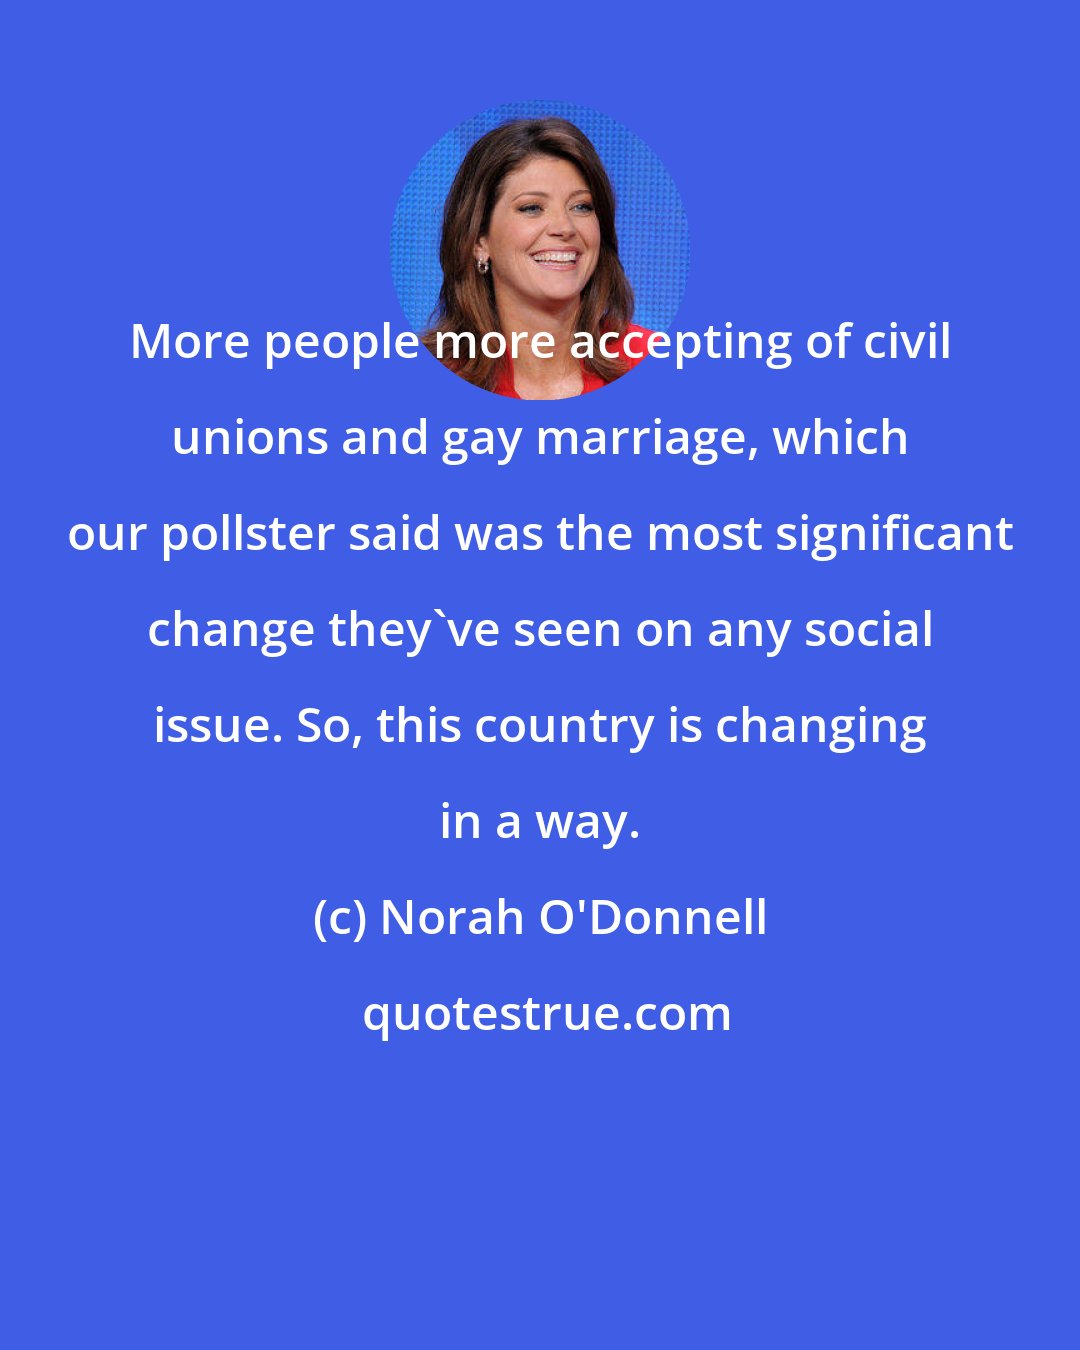 Norah O'Donnell: More people more accepting of civil unions and gay marriage, which our pollster said was the most significant change they've seen on any social issue. So, this country is changing in a way.